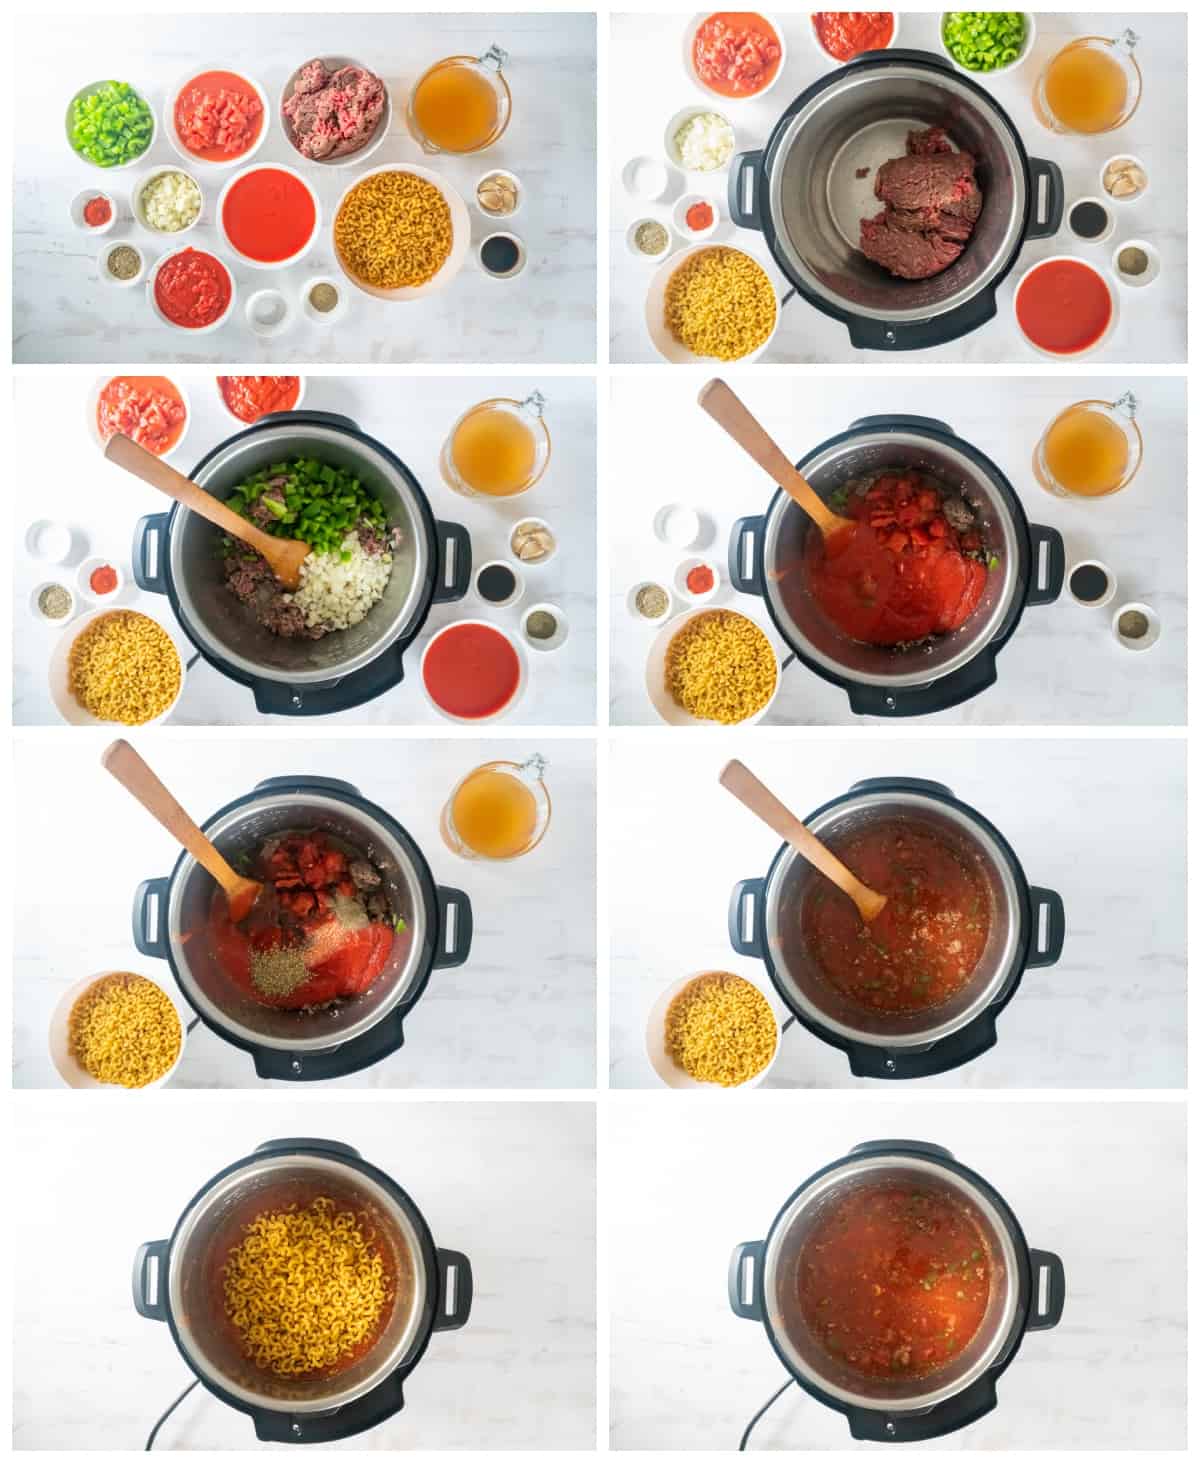 how to make goulash in an instant pot step by step photo instructions